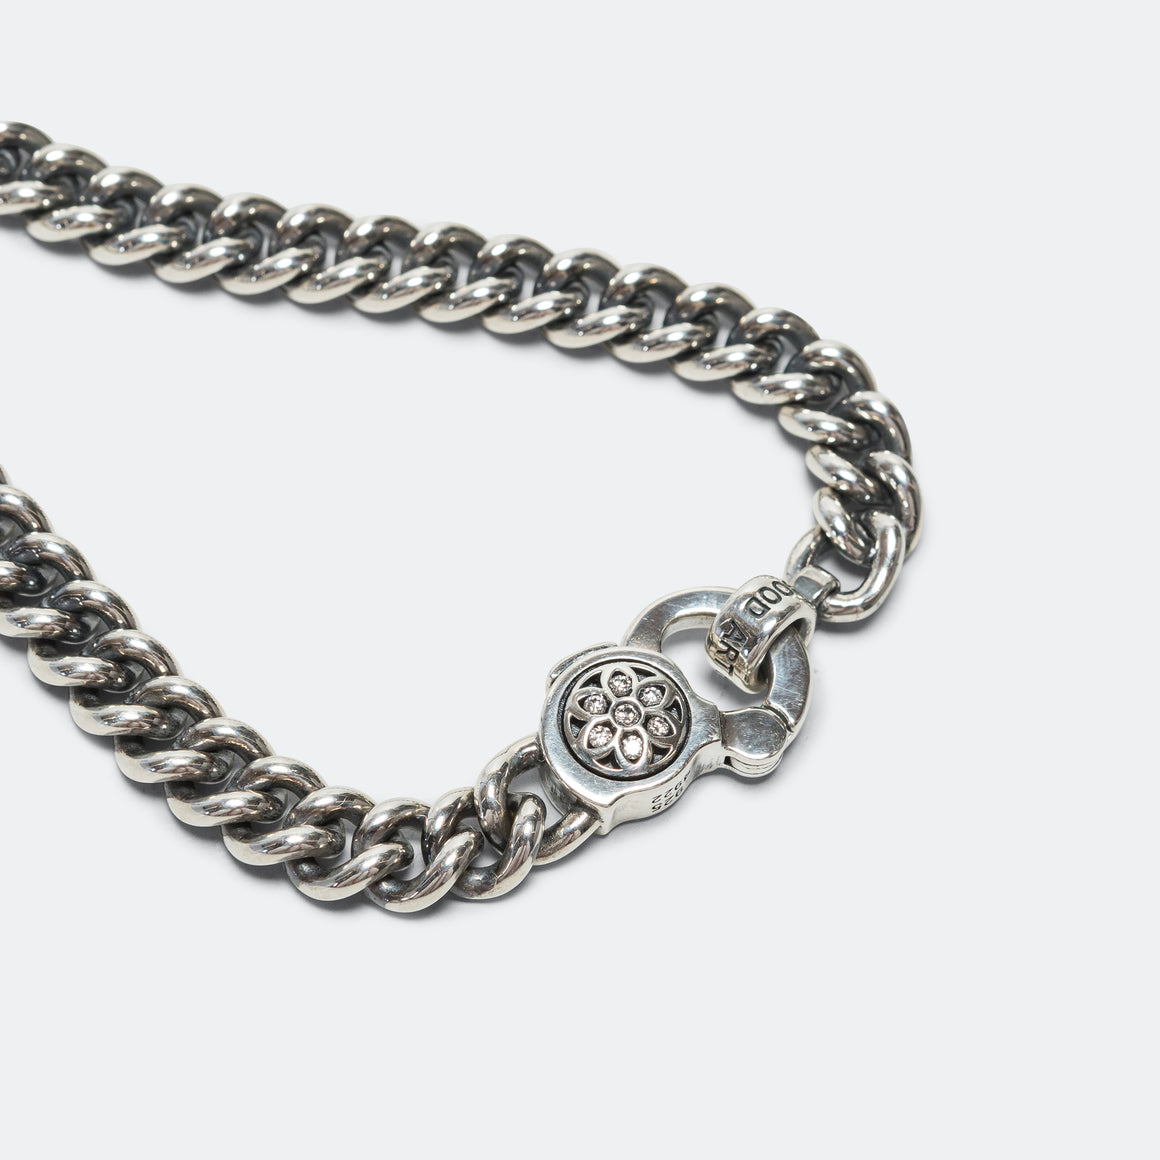 Good Art Hlywd - Curb Chain Bracelet w/ White Diamonds - A - 925 Silver - UP THERE